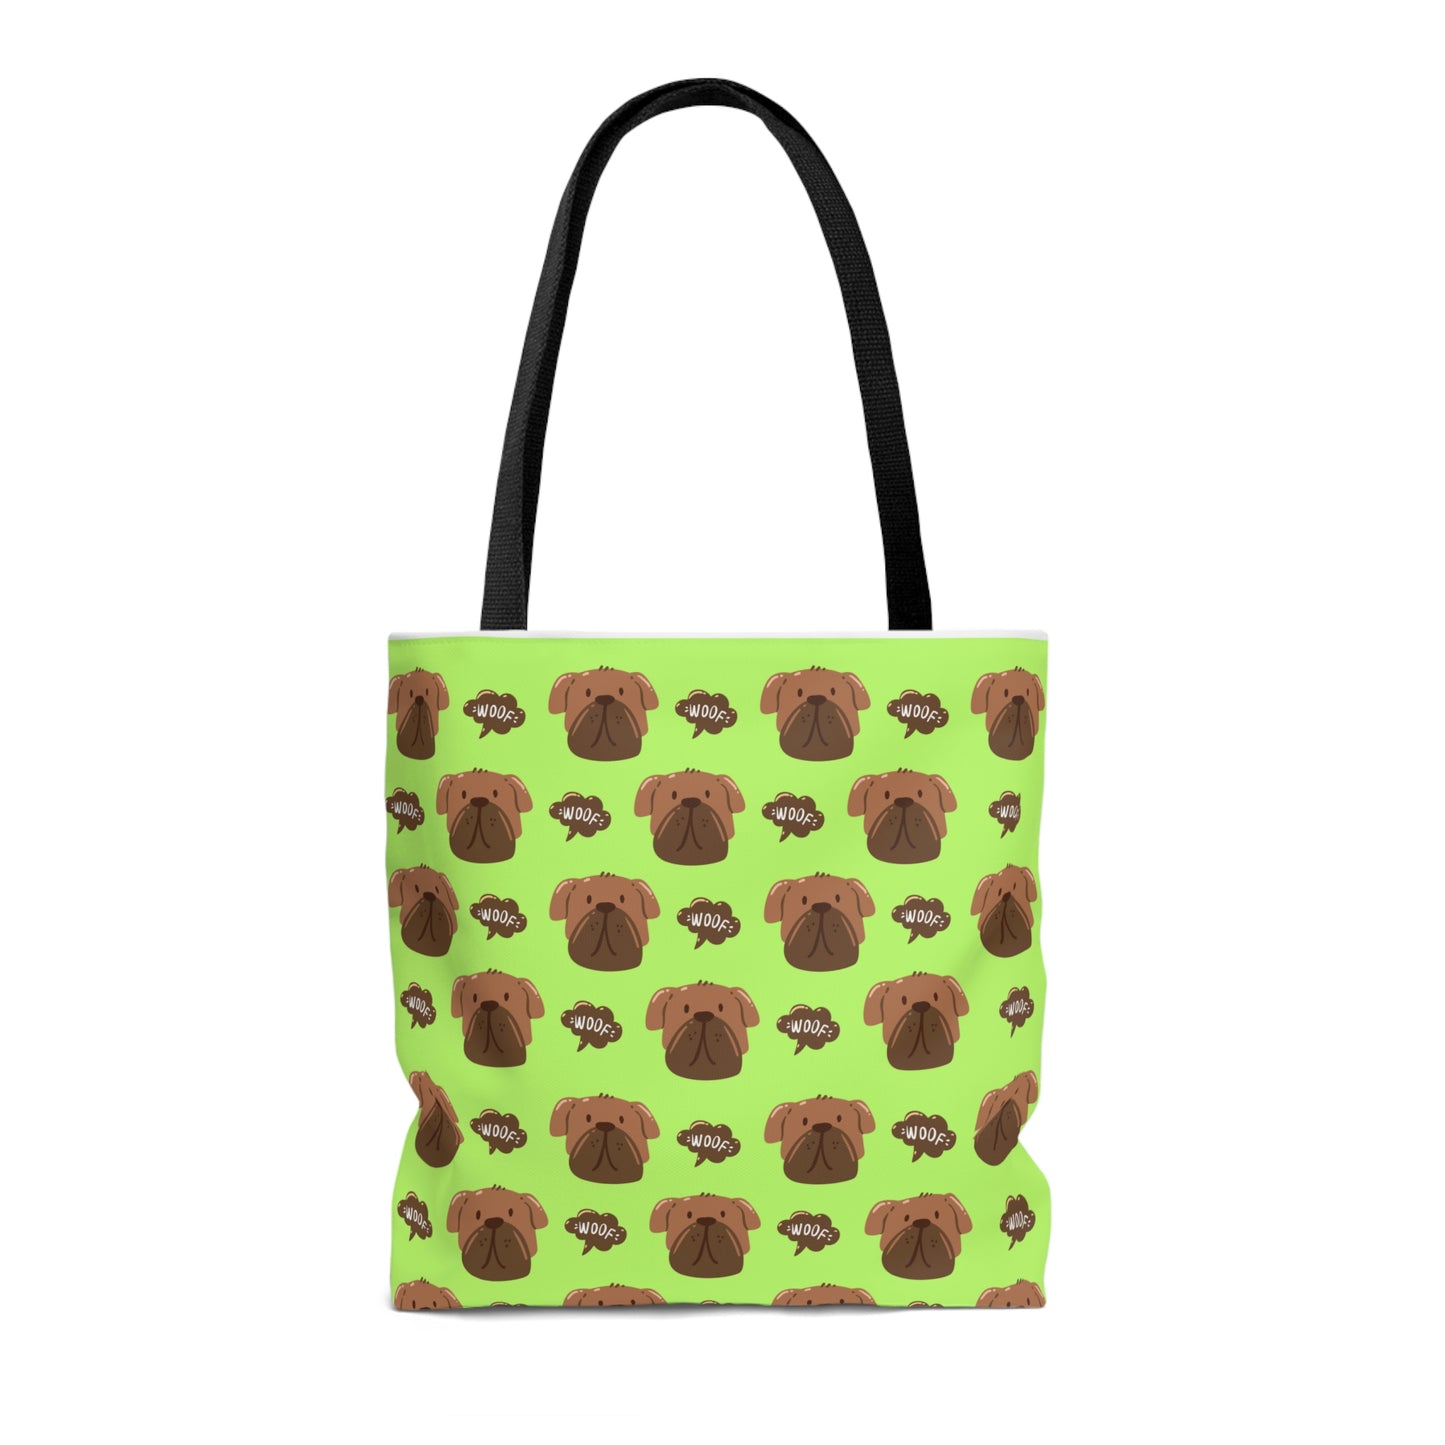 "Woof" Cute Dog Faces with Paws Design Tote Bag (AOP)